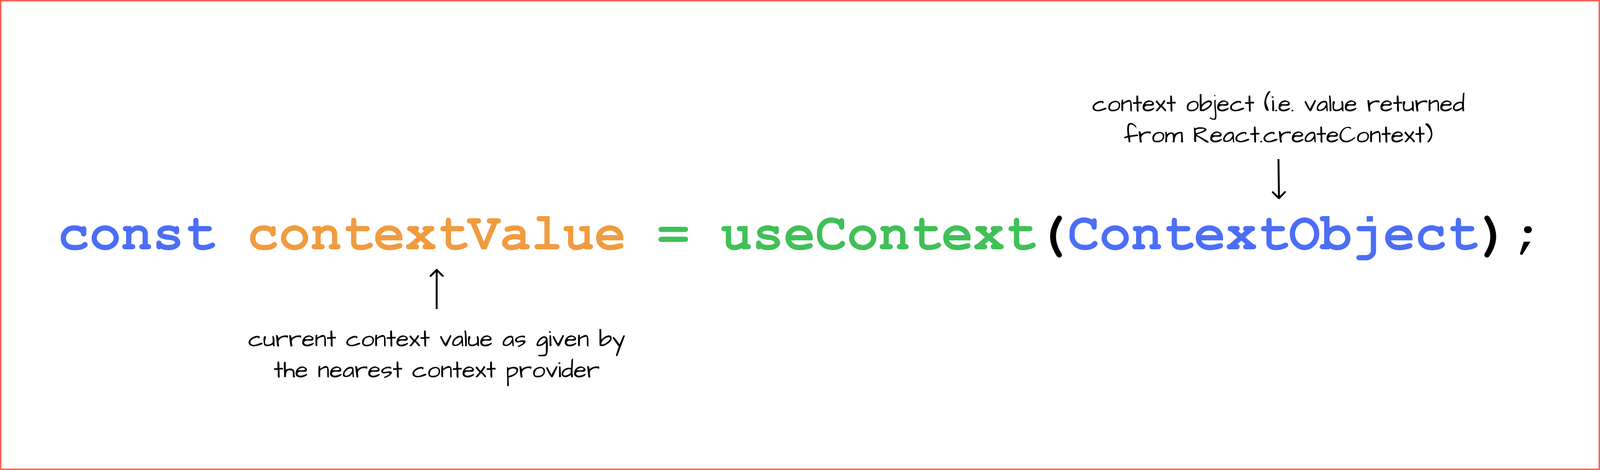 Description of the useContext Hook: const contextValue = useContext(ContextObject). ContextValue is the current value as given by the nearest context provider. ContextObject is value returned from ReactcreateContext